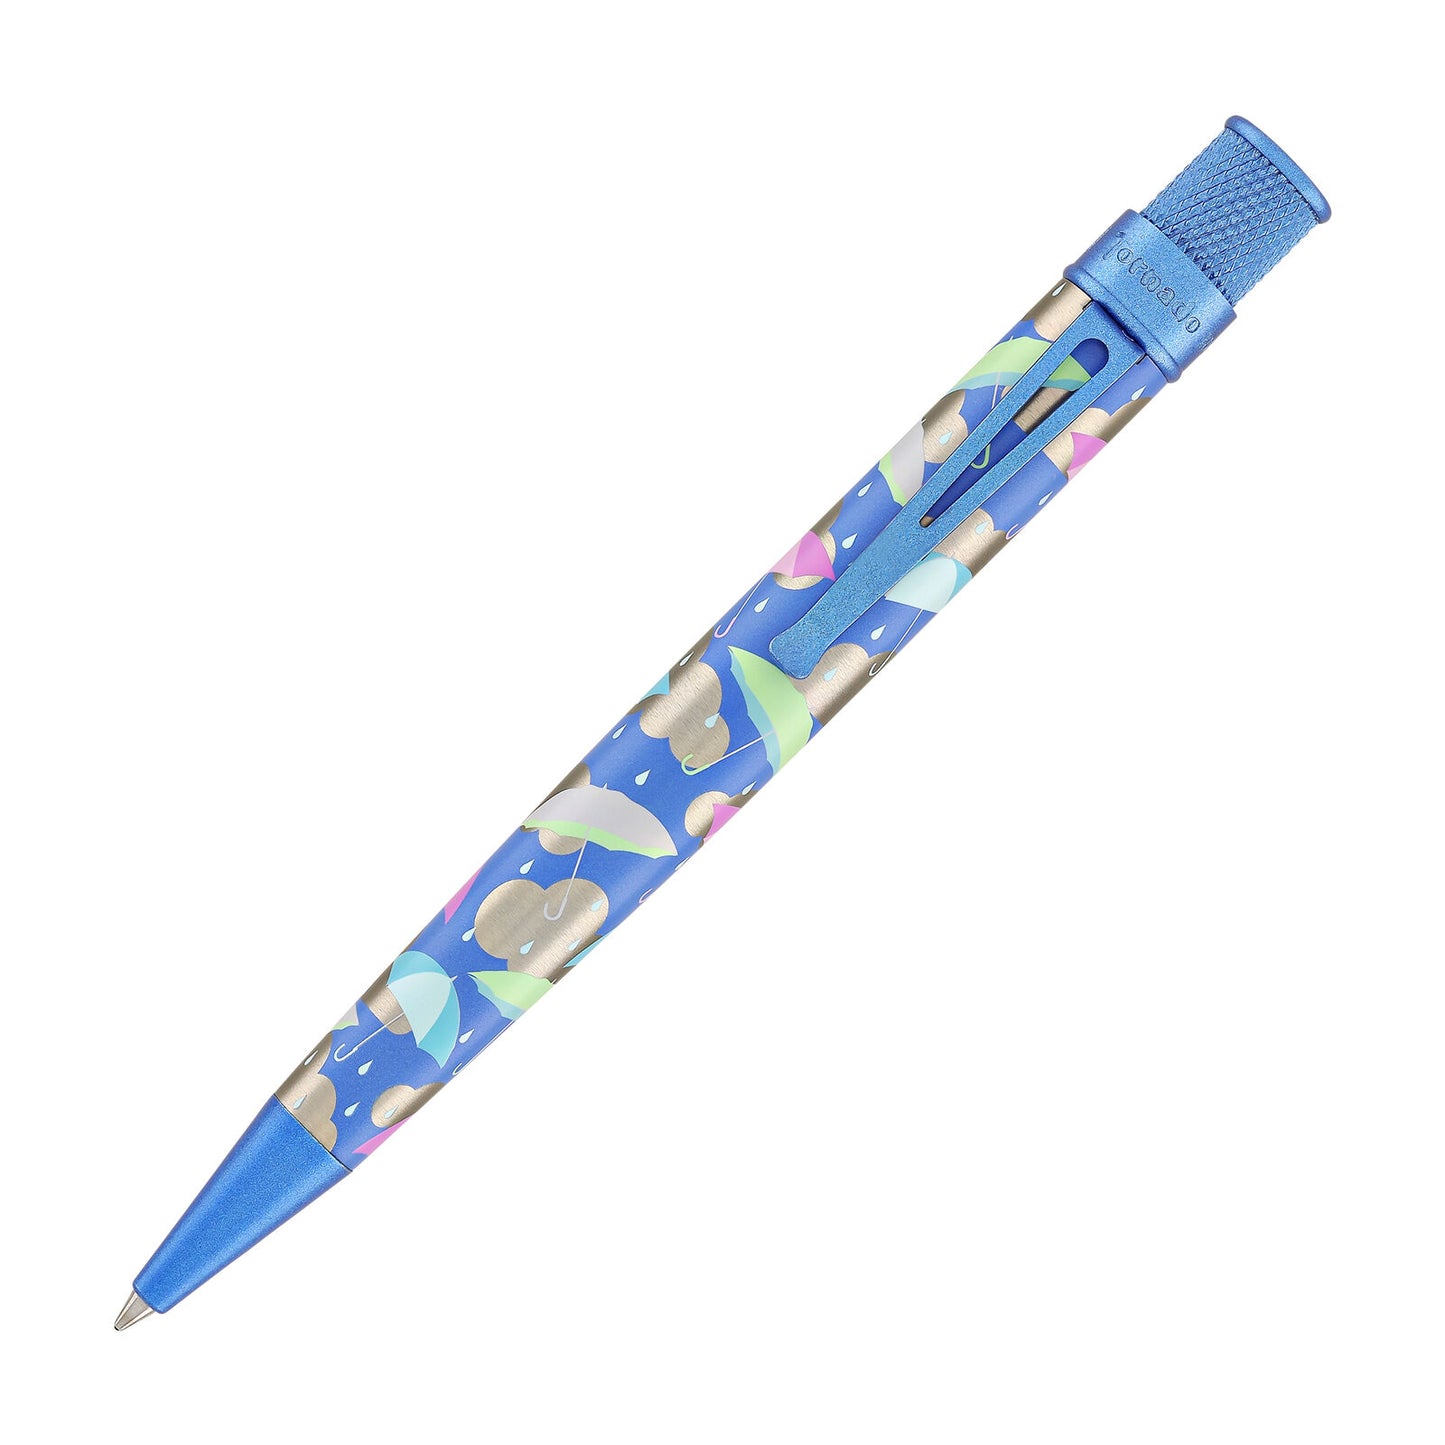 Retro 51 April Showers Rollerball Pen- NEW-SEALED-#'S